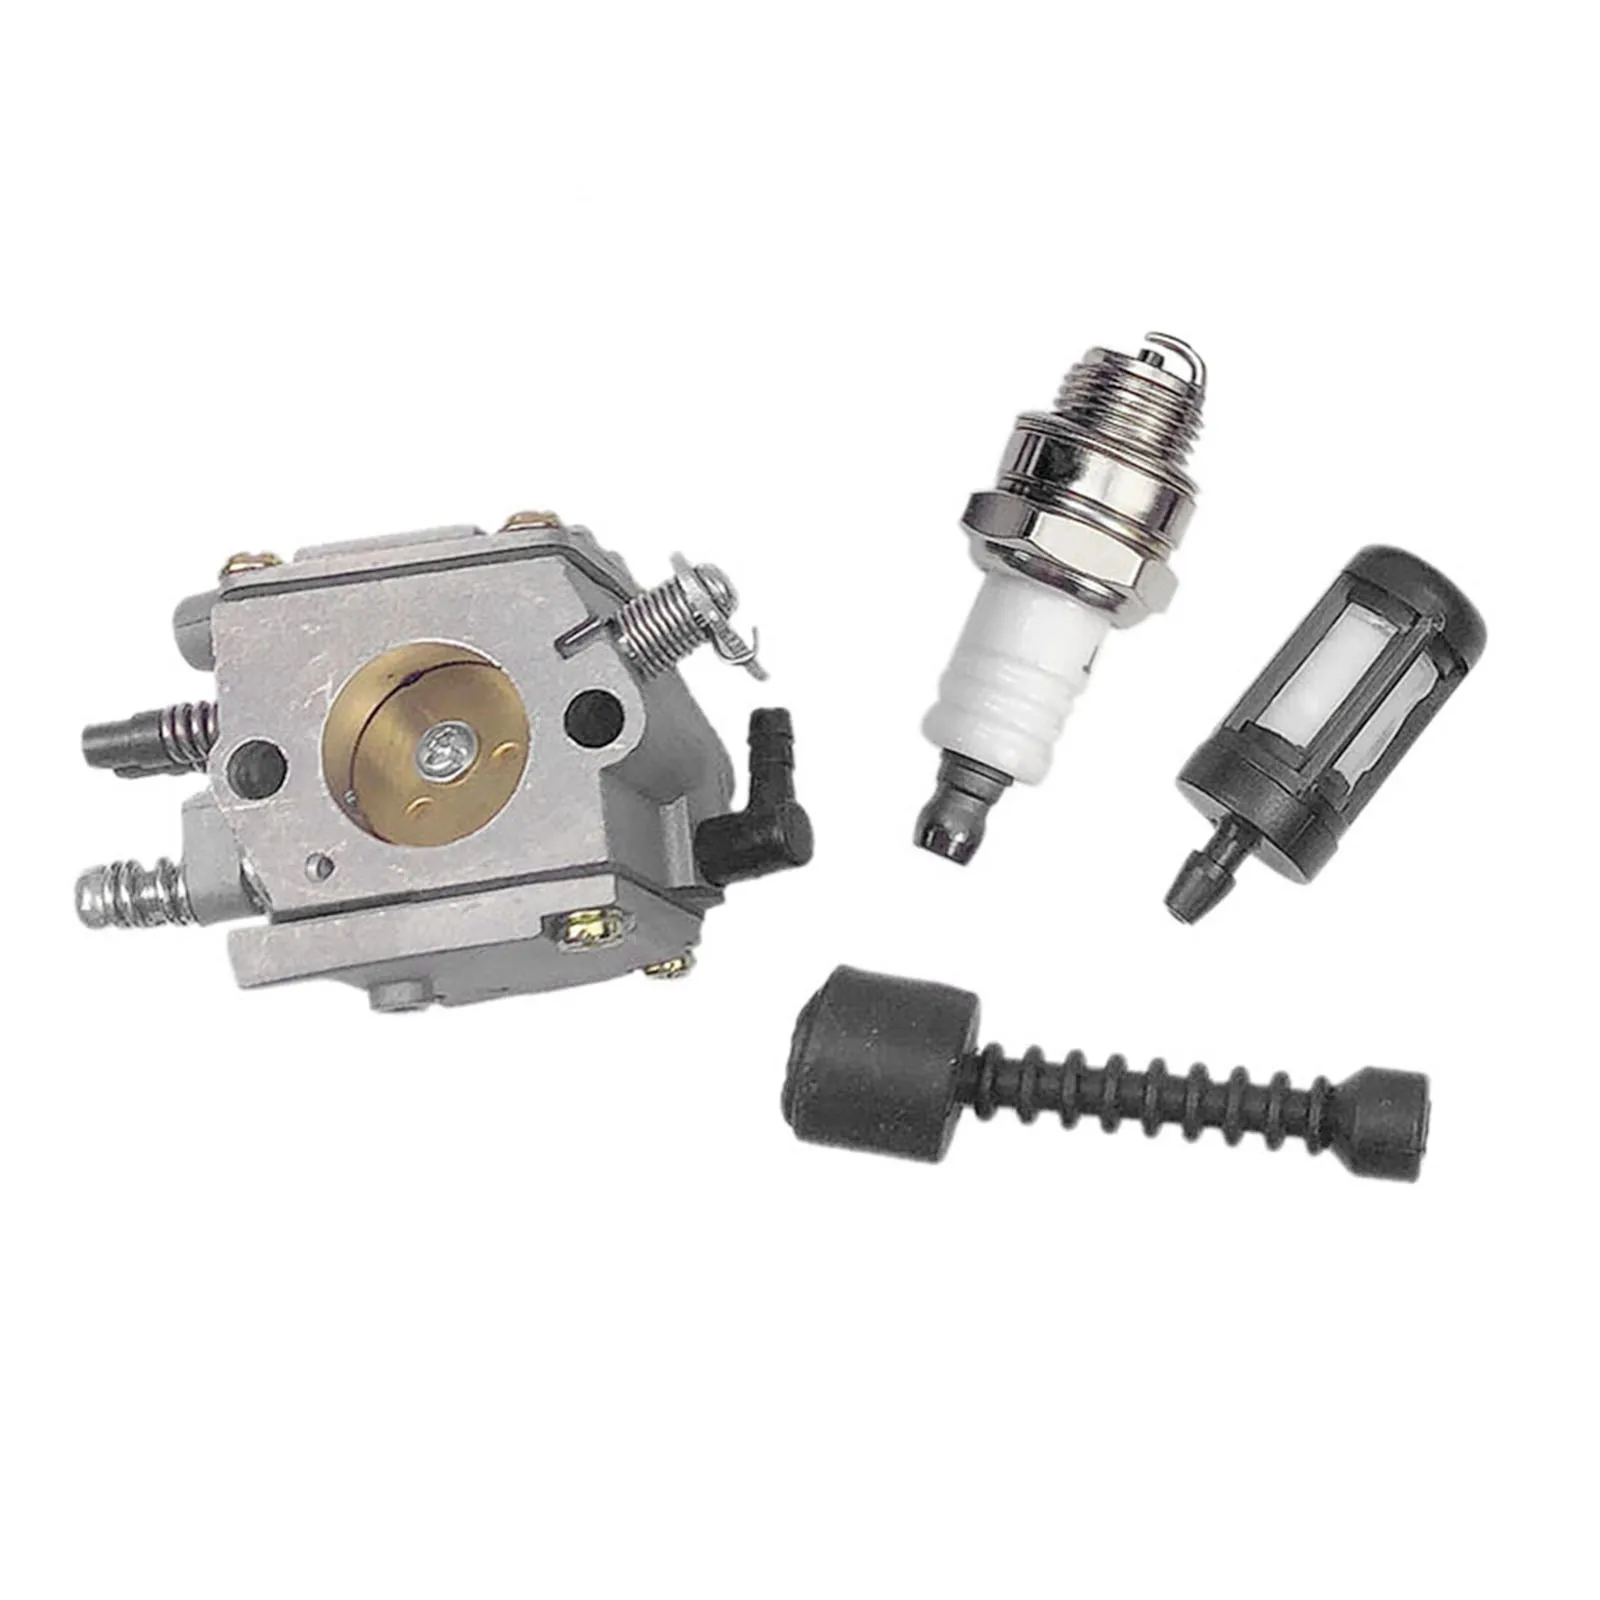 Chainsaws Carburetor Ignition Coil & Fuel Line/Filer Kit Replacement For Stihl Chain Saw 038 MS380 MS381 038 AV SUPER MAGNUM